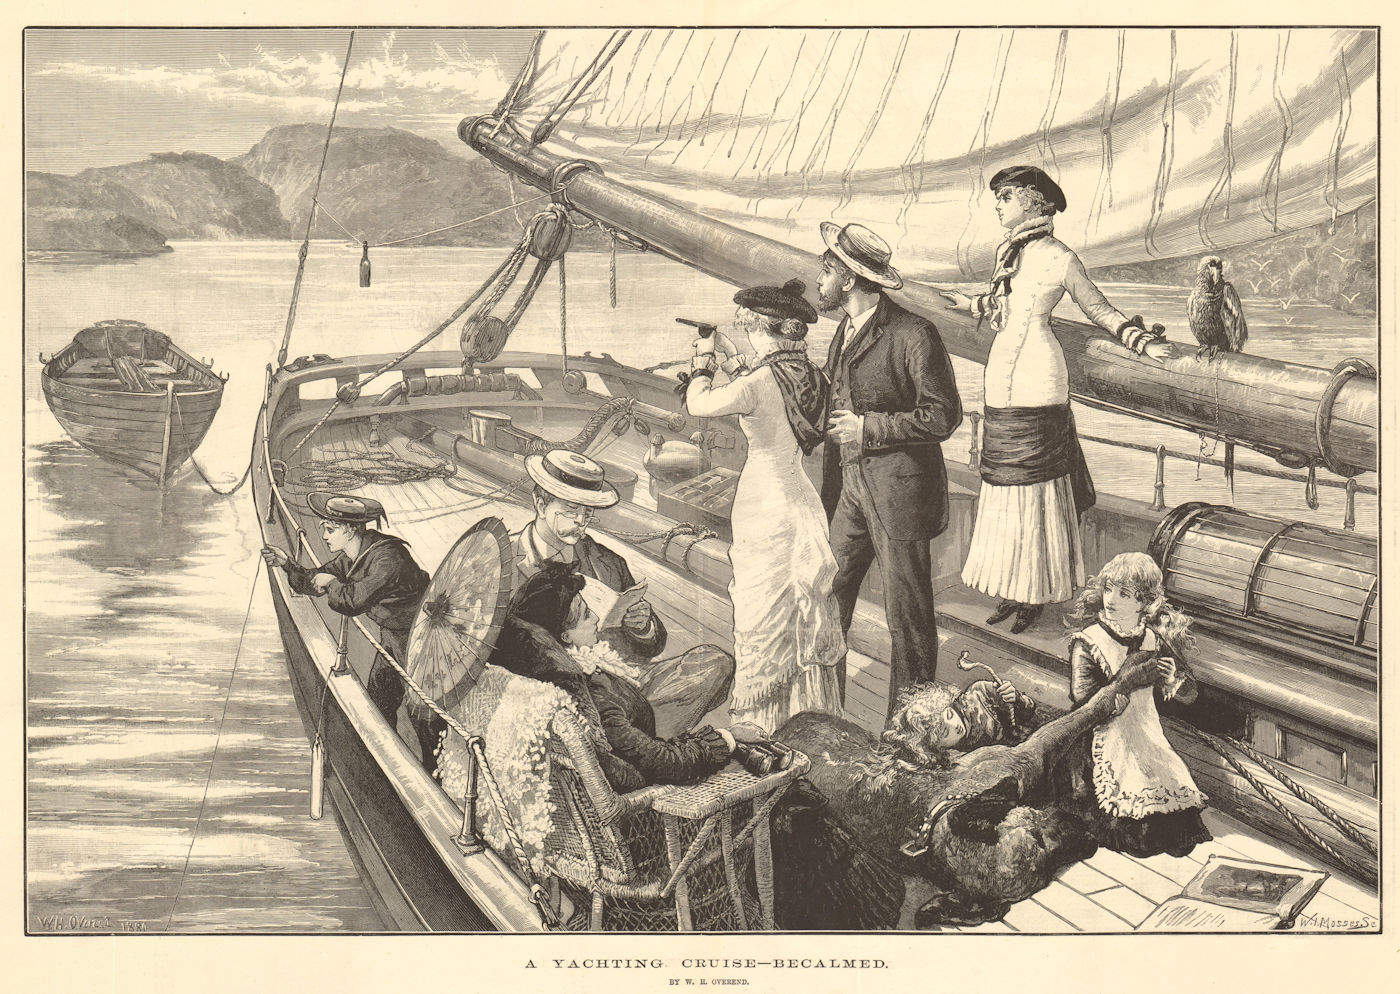 Associate Product "A yachting cruise - becalmed", by W. H. Overend. Society. Sailing 1880 print